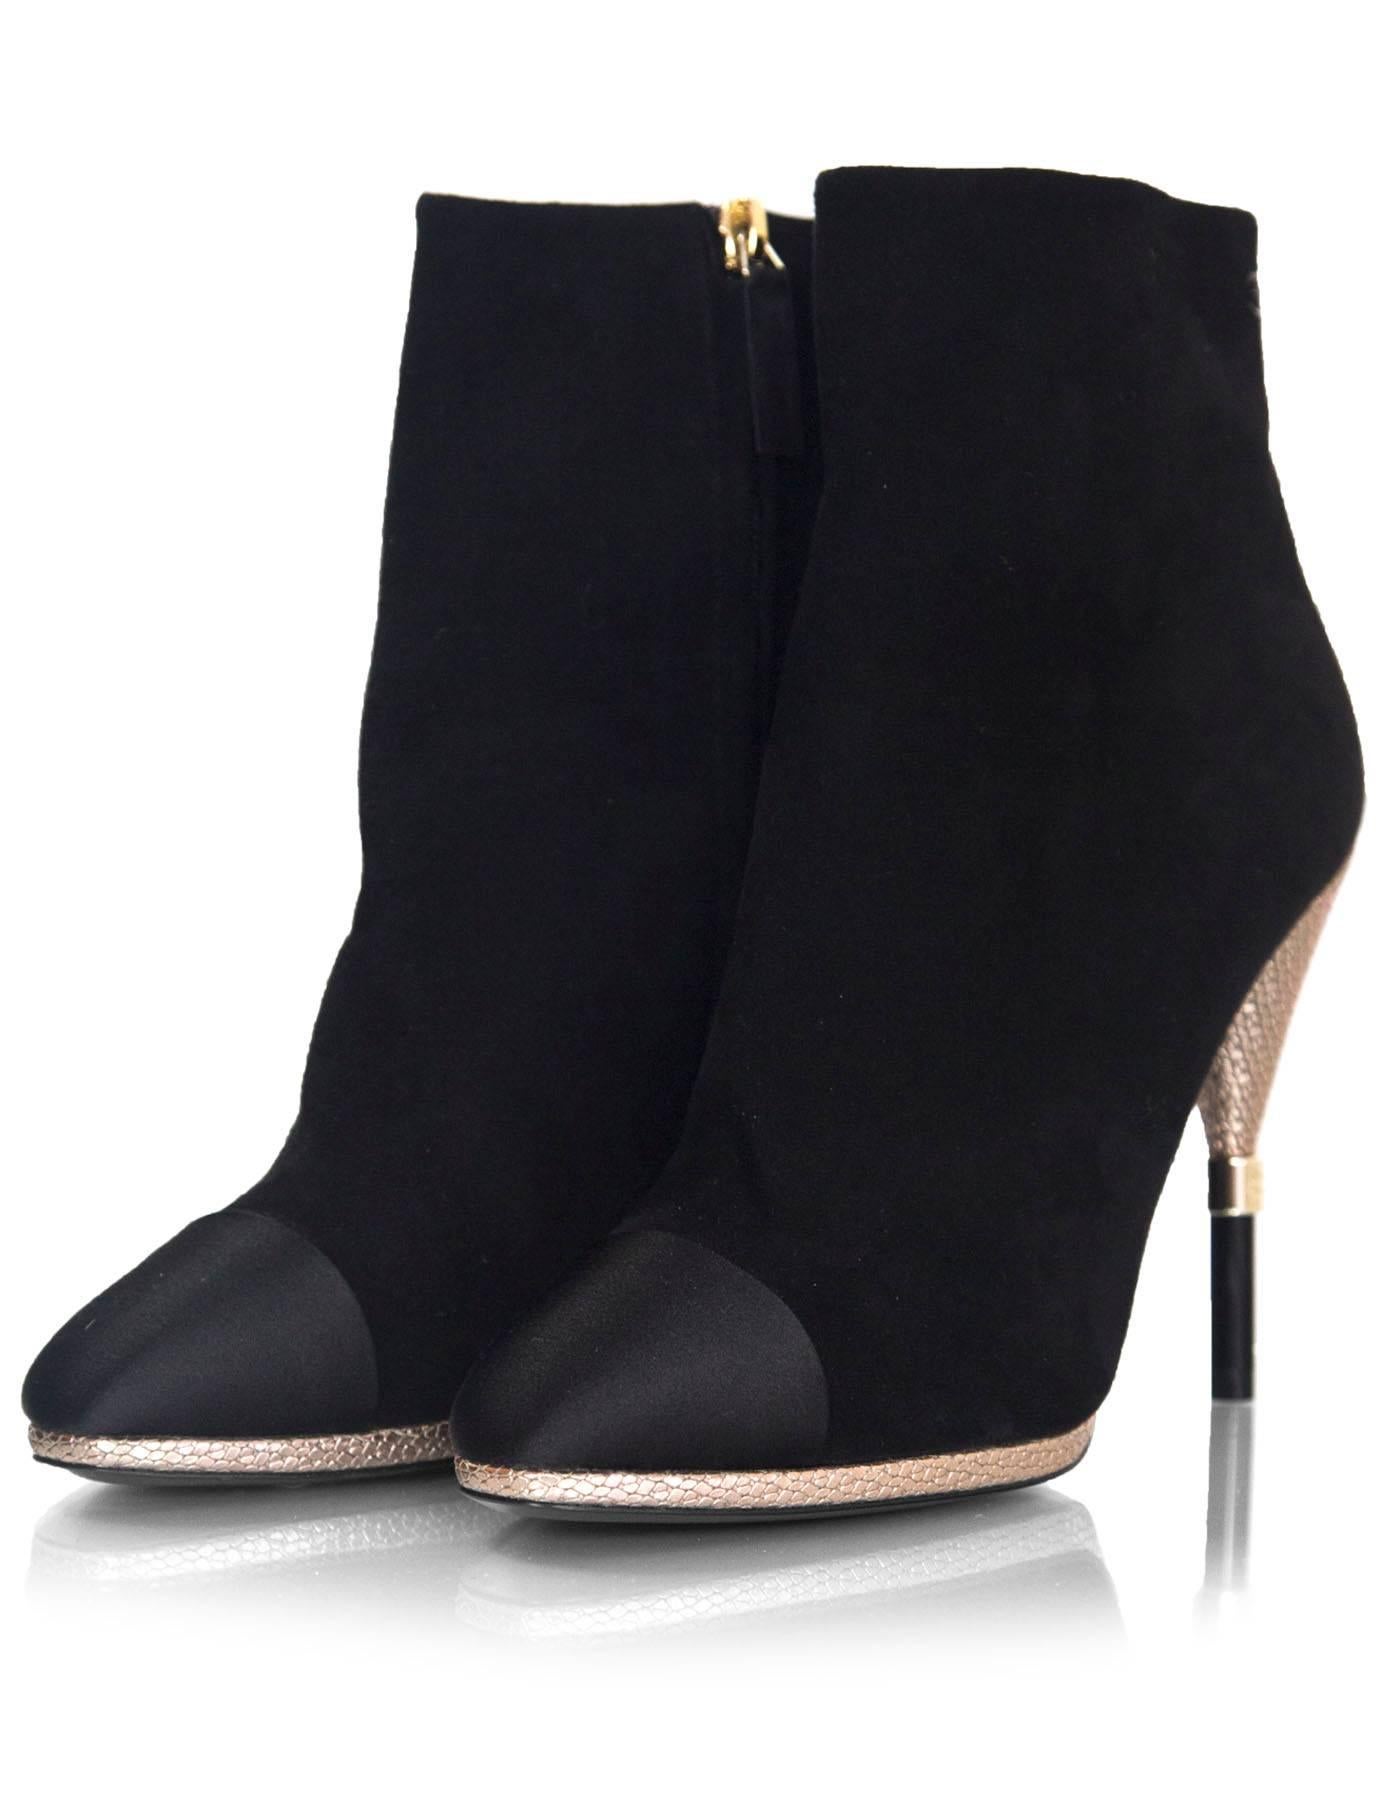 Chanel Black Suede & Satin Cap-Toe Ankle Boots Sz 39C NEW
Features textured light goldtone and black laquered heels with CHANEL logo

*Please note this is a wide-fit shoe*

Made In: Italy
Color: Black, gold
Composition: Suede, satin, metal
Sole